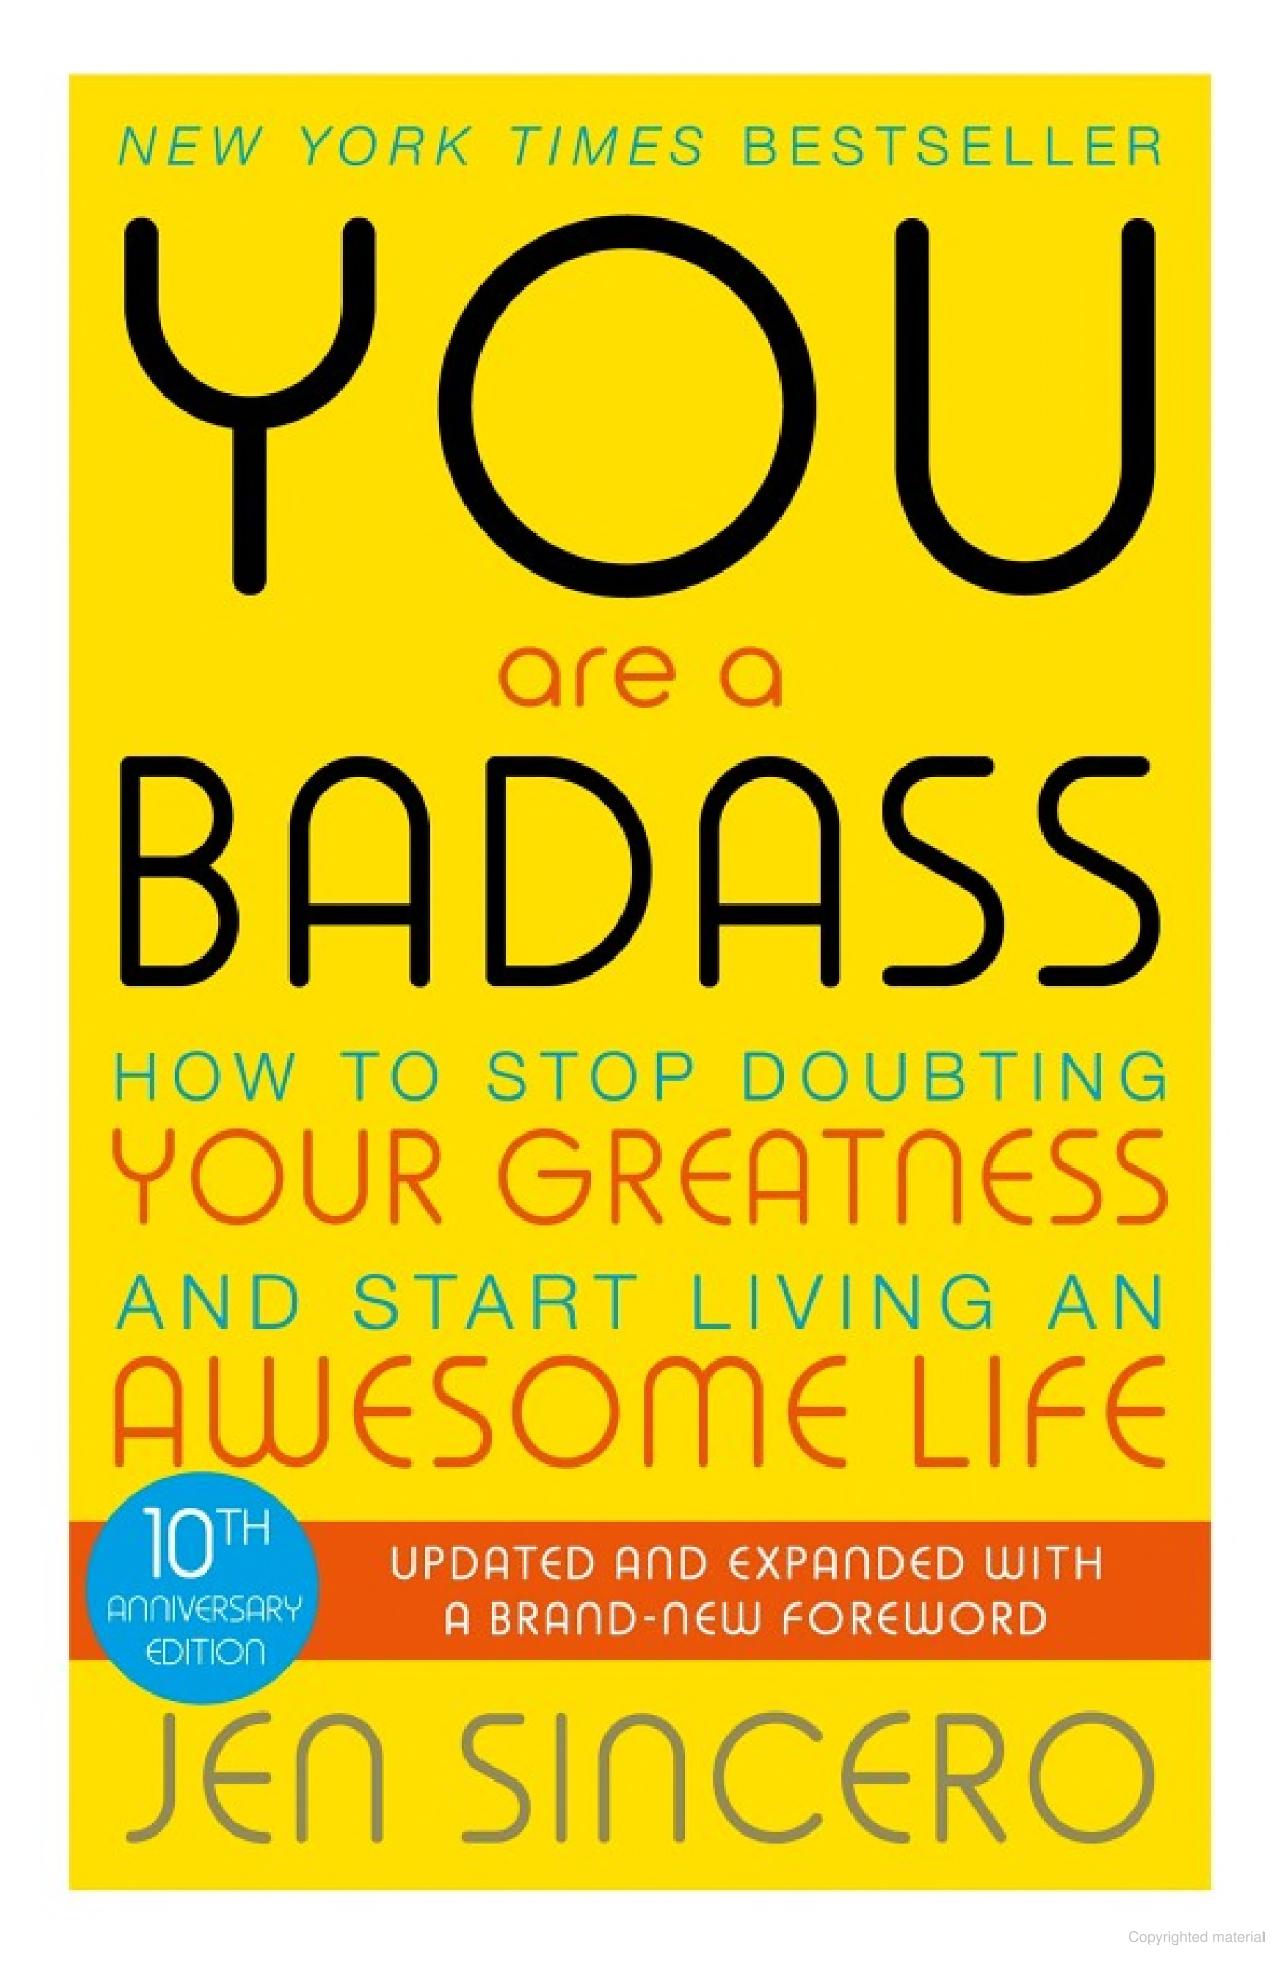 You Are a Badass: How to Stop Doubting Your Greatness and Start Living an Awesome Life
Book by Jen Sincero